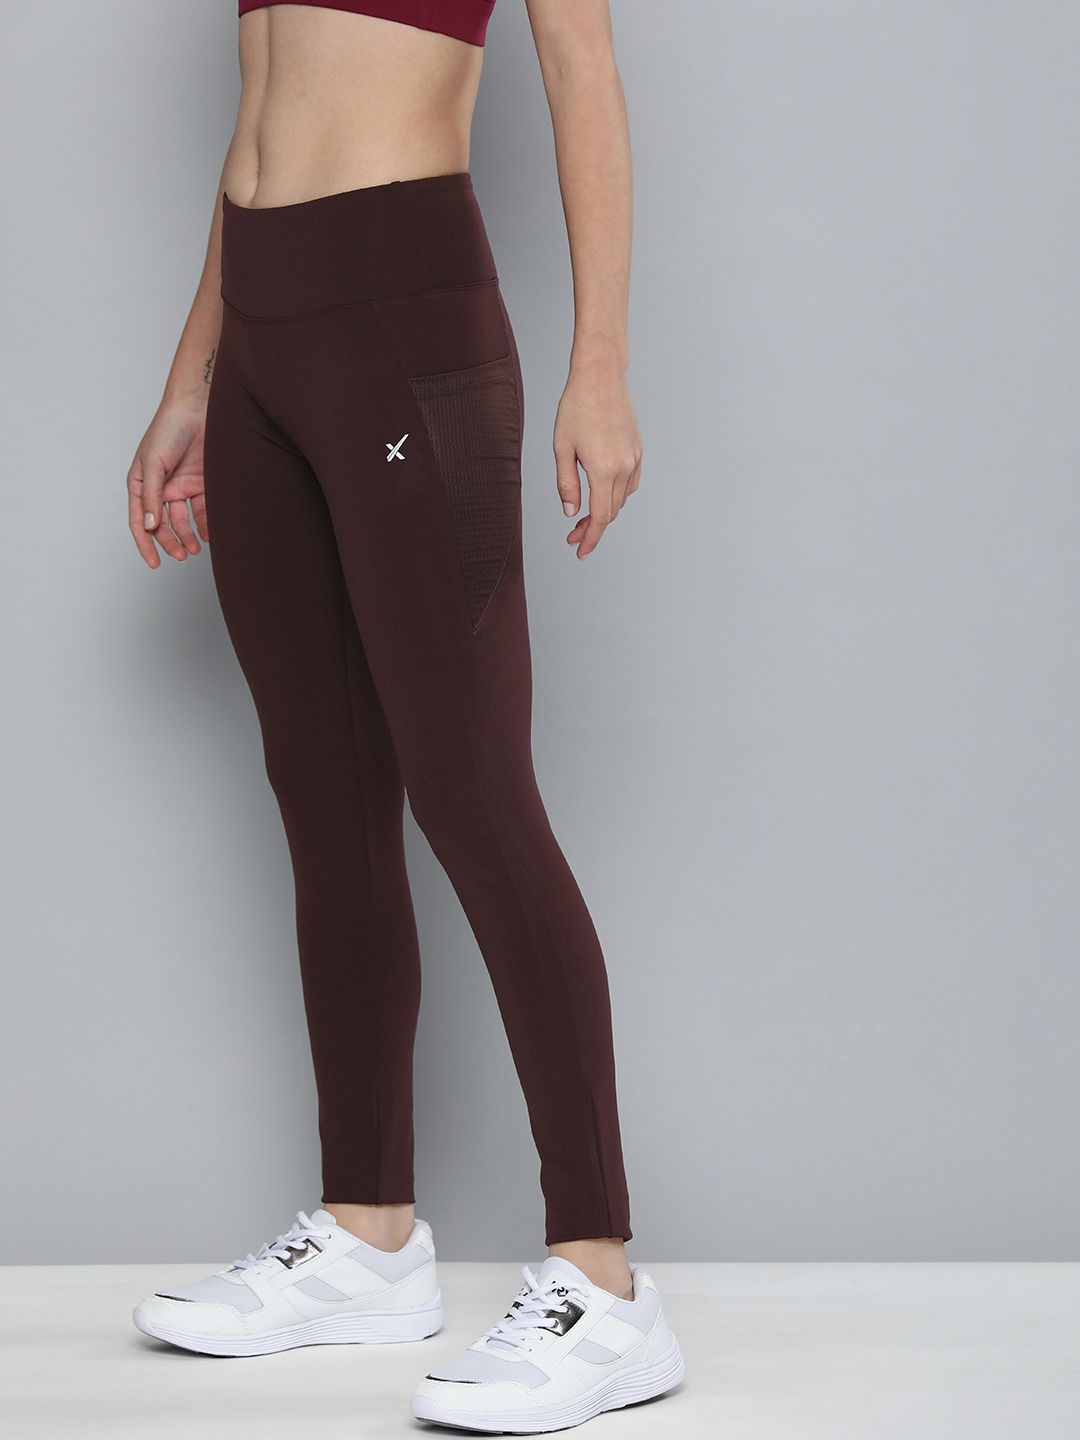 HRX By Hrithik Roshan Women Burgundy Running Rapid-Dry Technology Tights Price in India